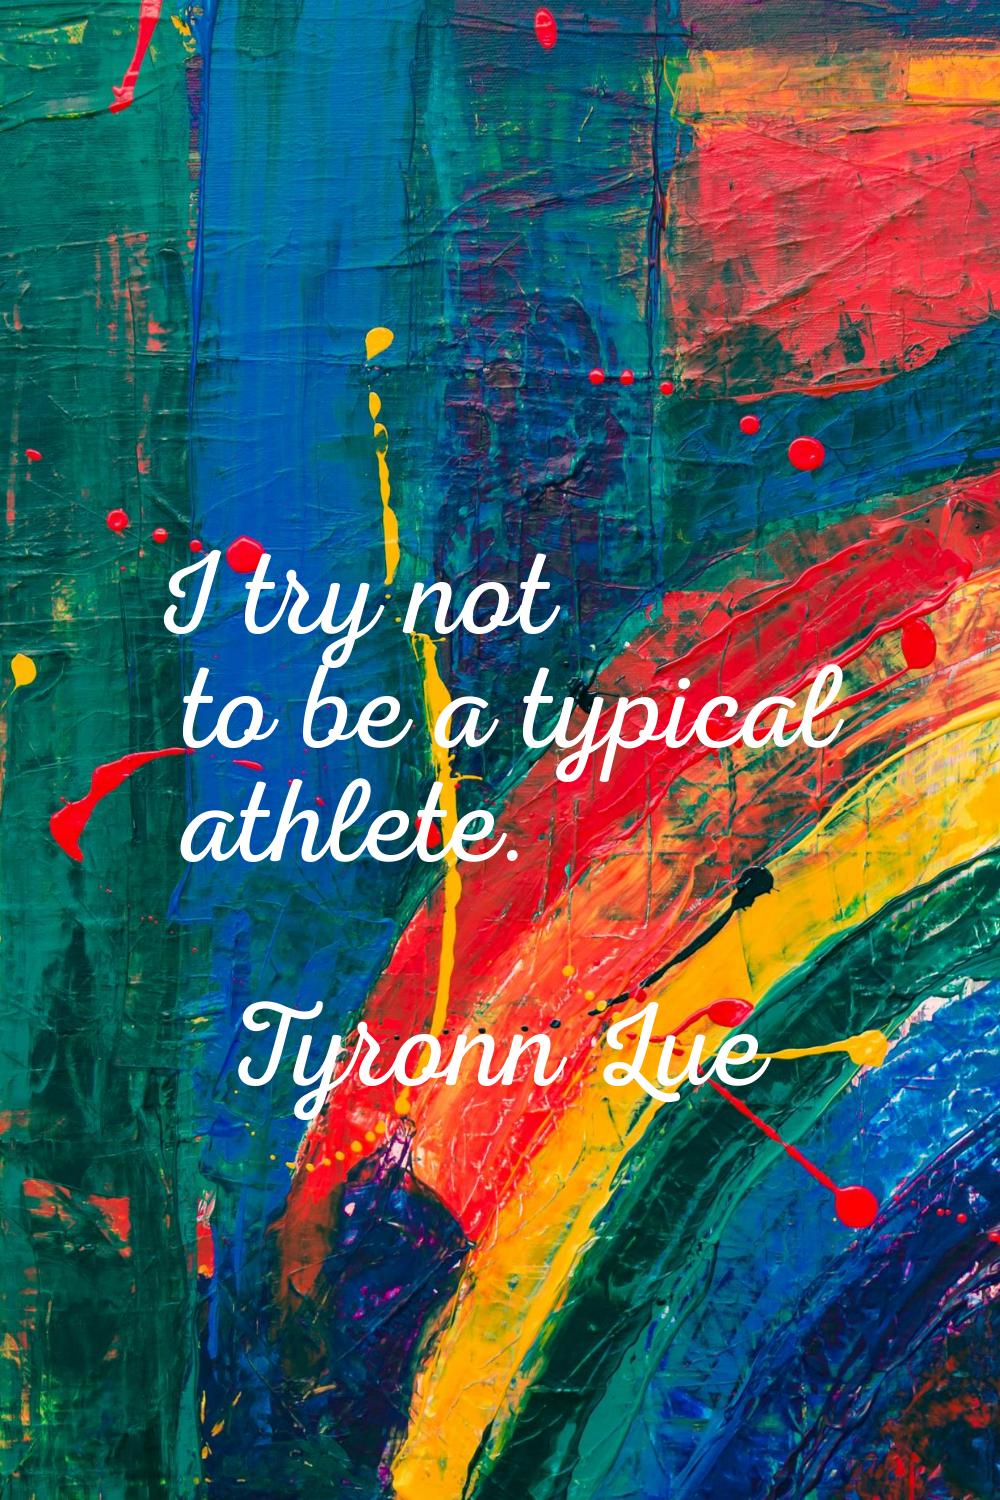 I try not to be a typical athlete.